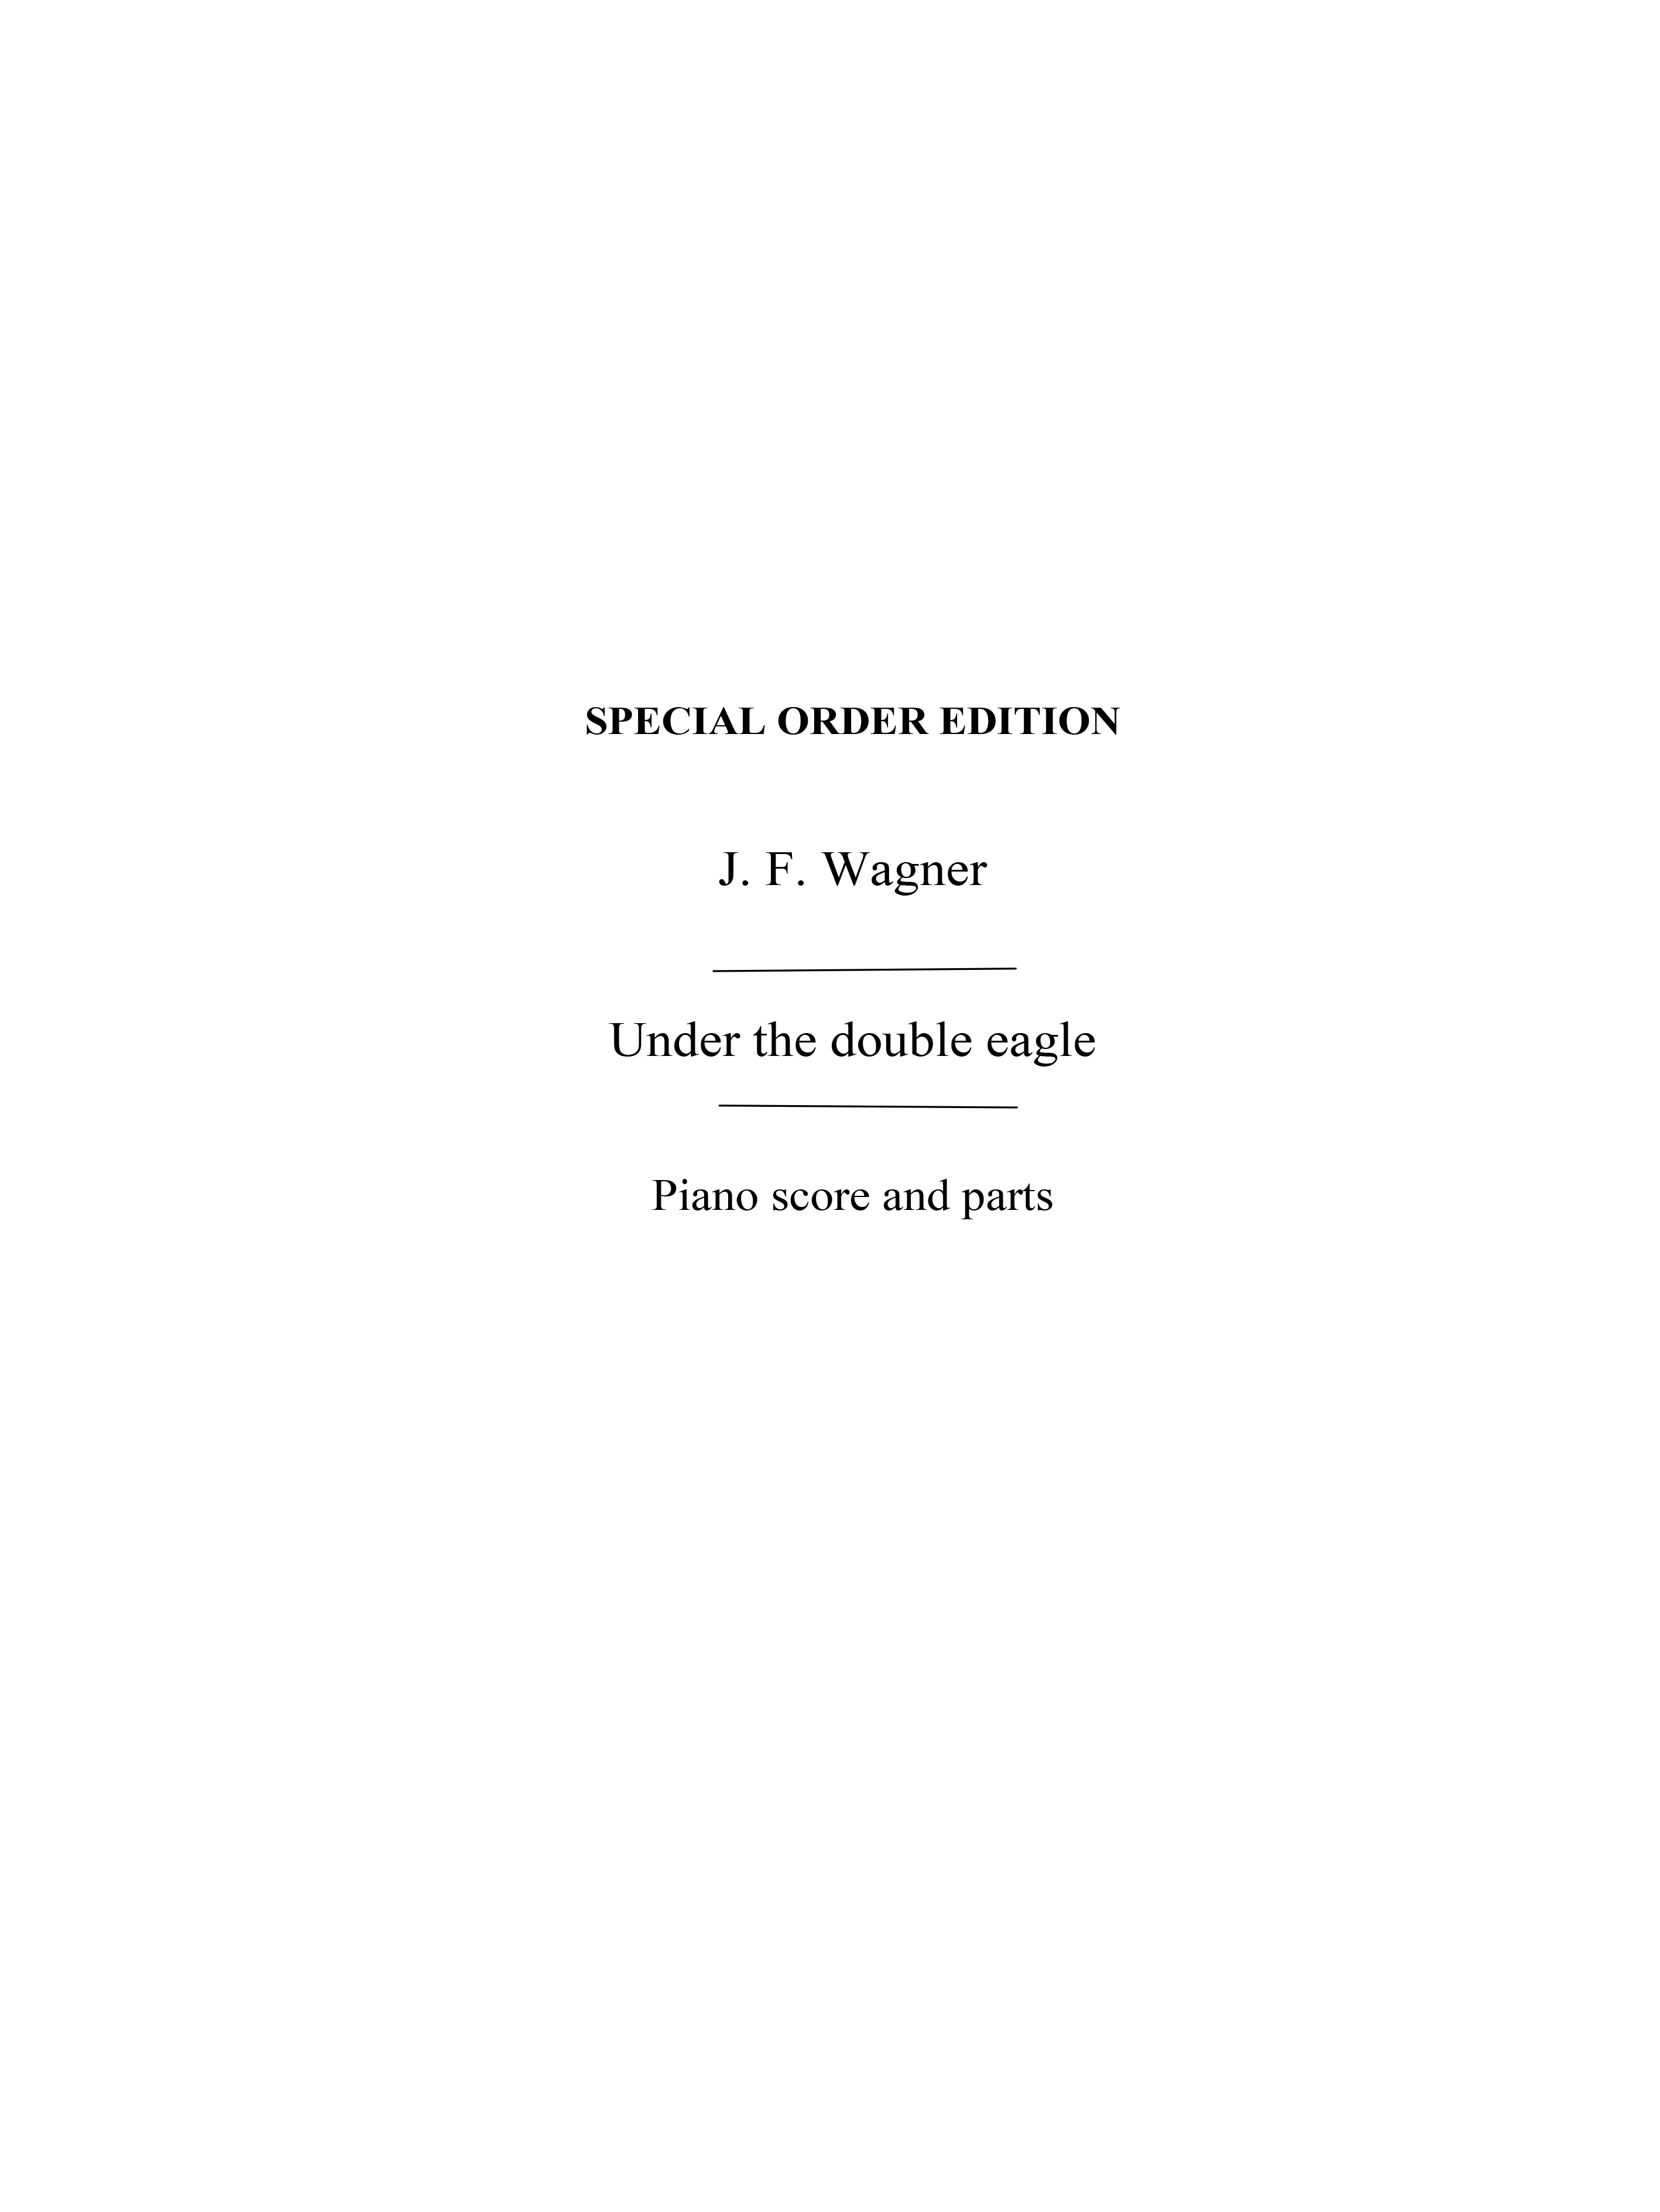 Wagner, Jf Under The Double Eagle March (Naylor) Orch Pf Sc/Pts